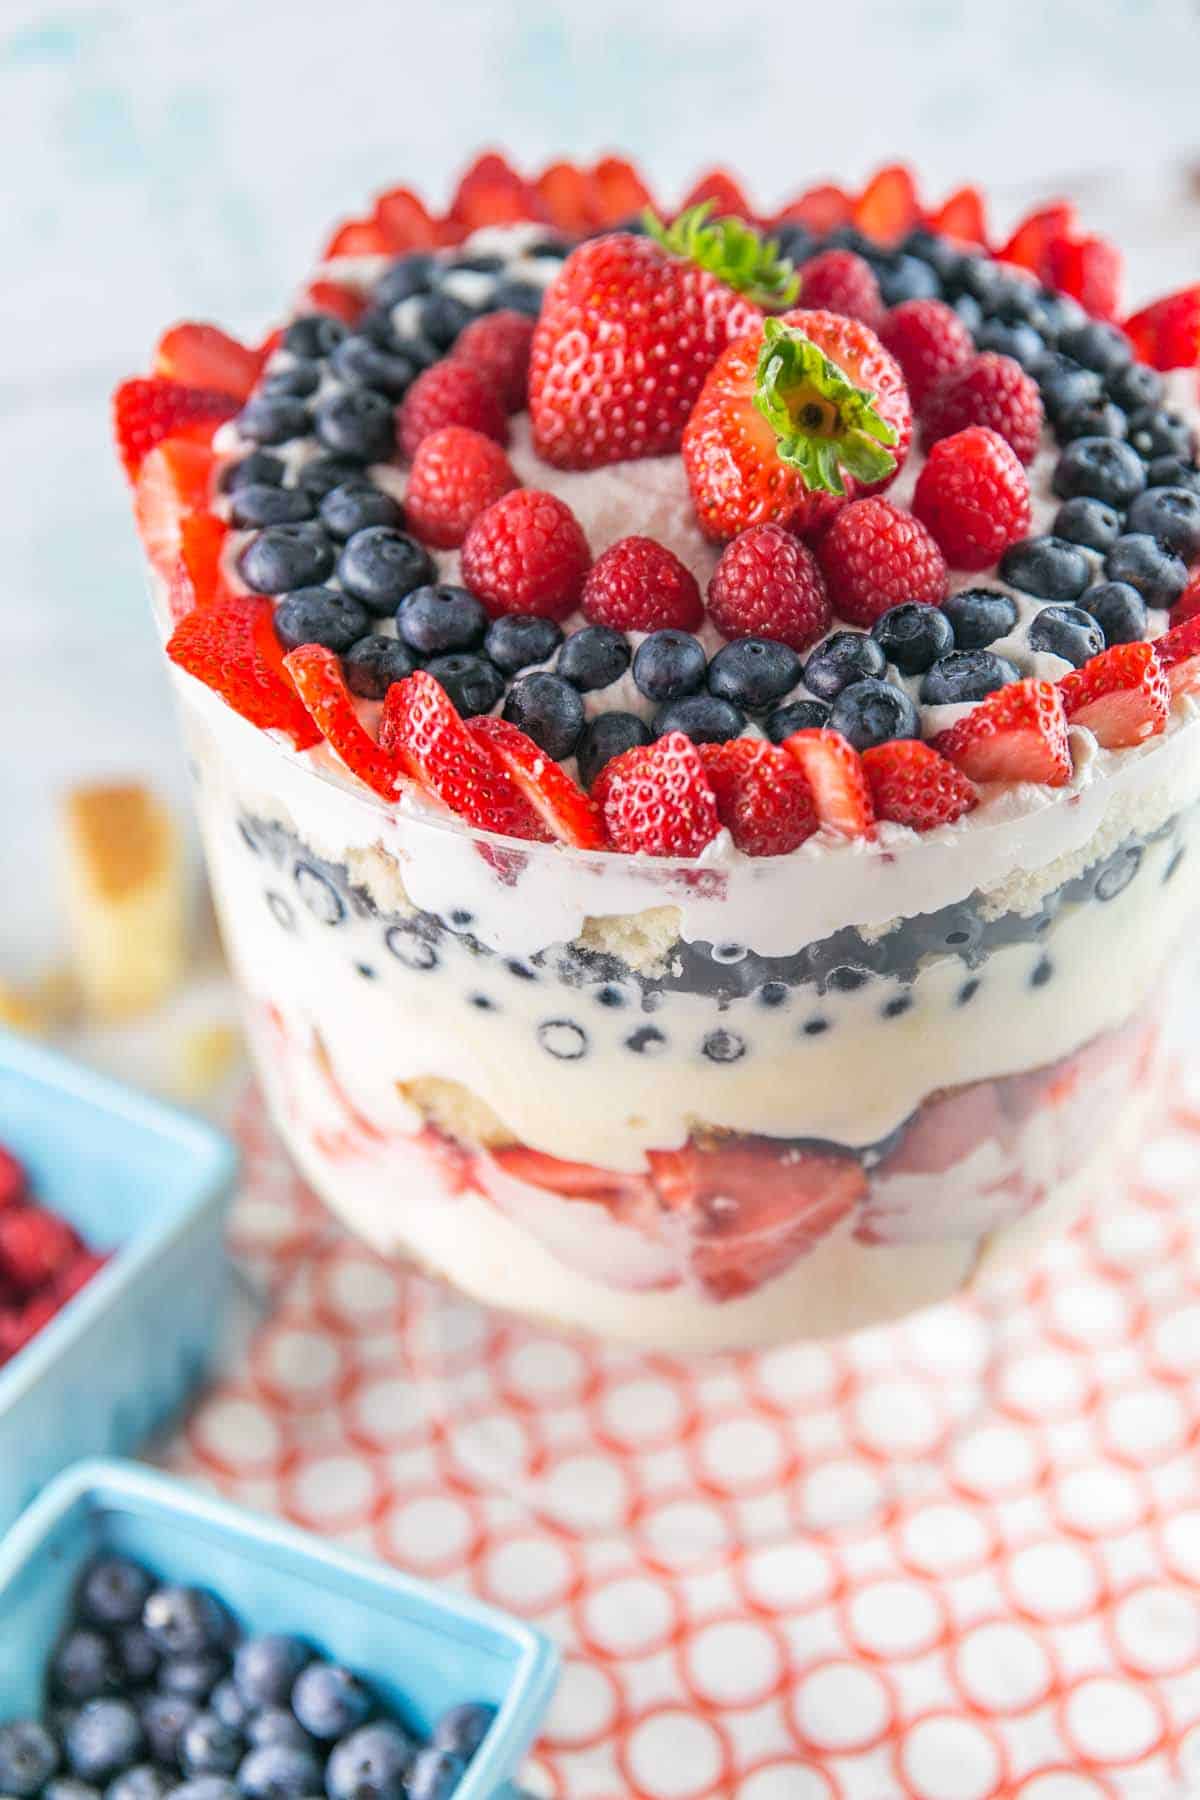 Summer Berry Trifle: Let berries shine in this easy, make ahead dessert perfect for summer entertaining. Homemade vanilla cake and lemon custard make it even better than store bought! {Bunsen Burner Bakery} #trifle #cake #berries #summerdesserts